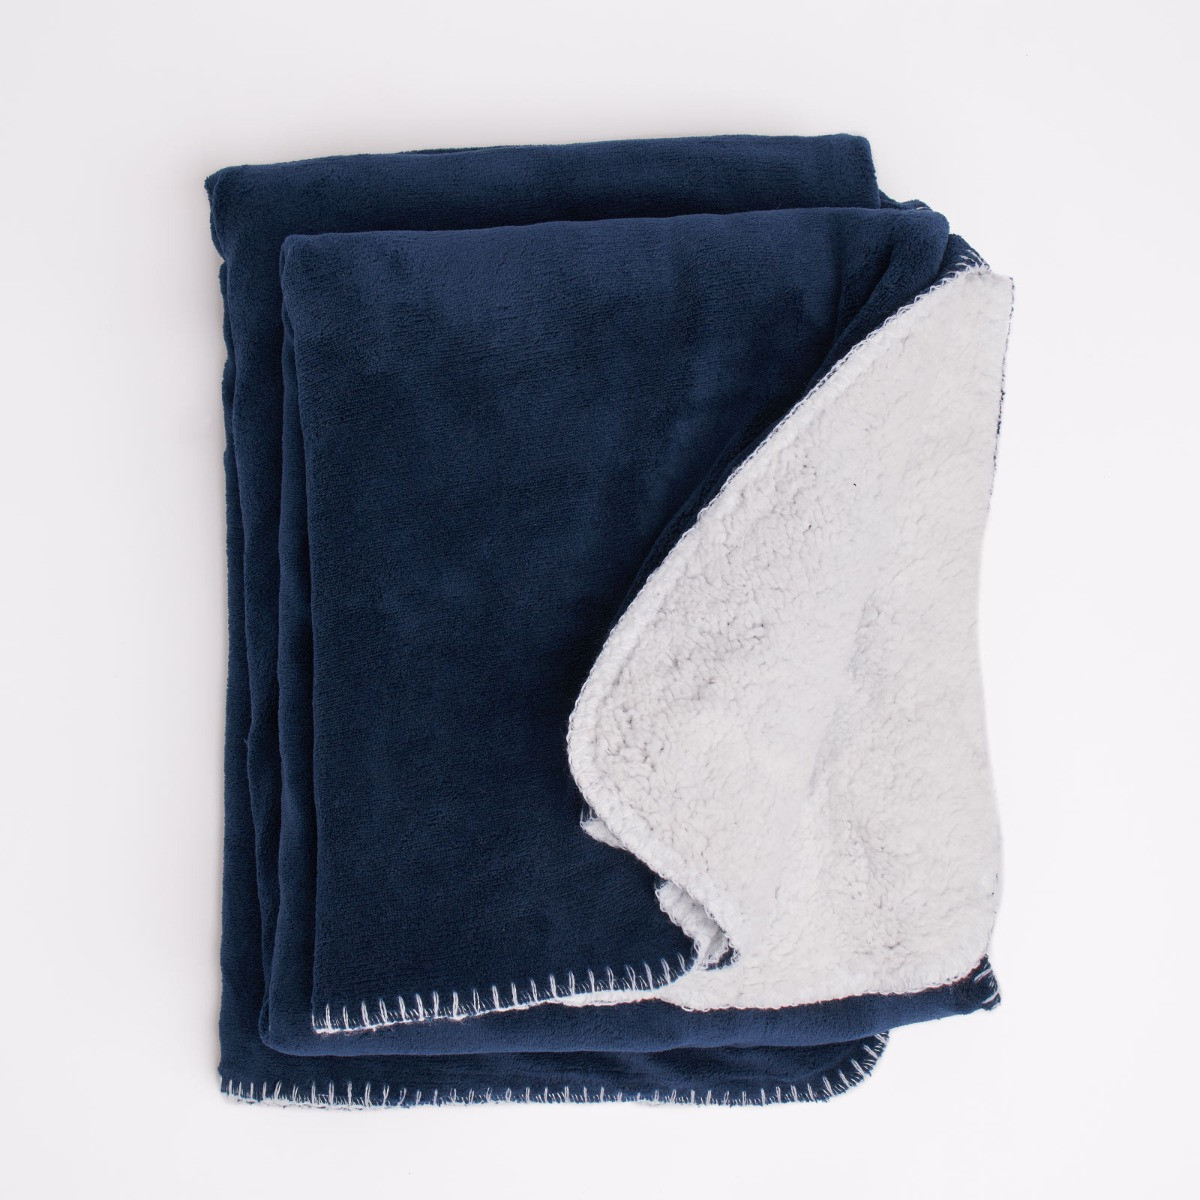 Brentfords by OHS Sherpa Throw Blanket, Navy - 60 x 70 inches>